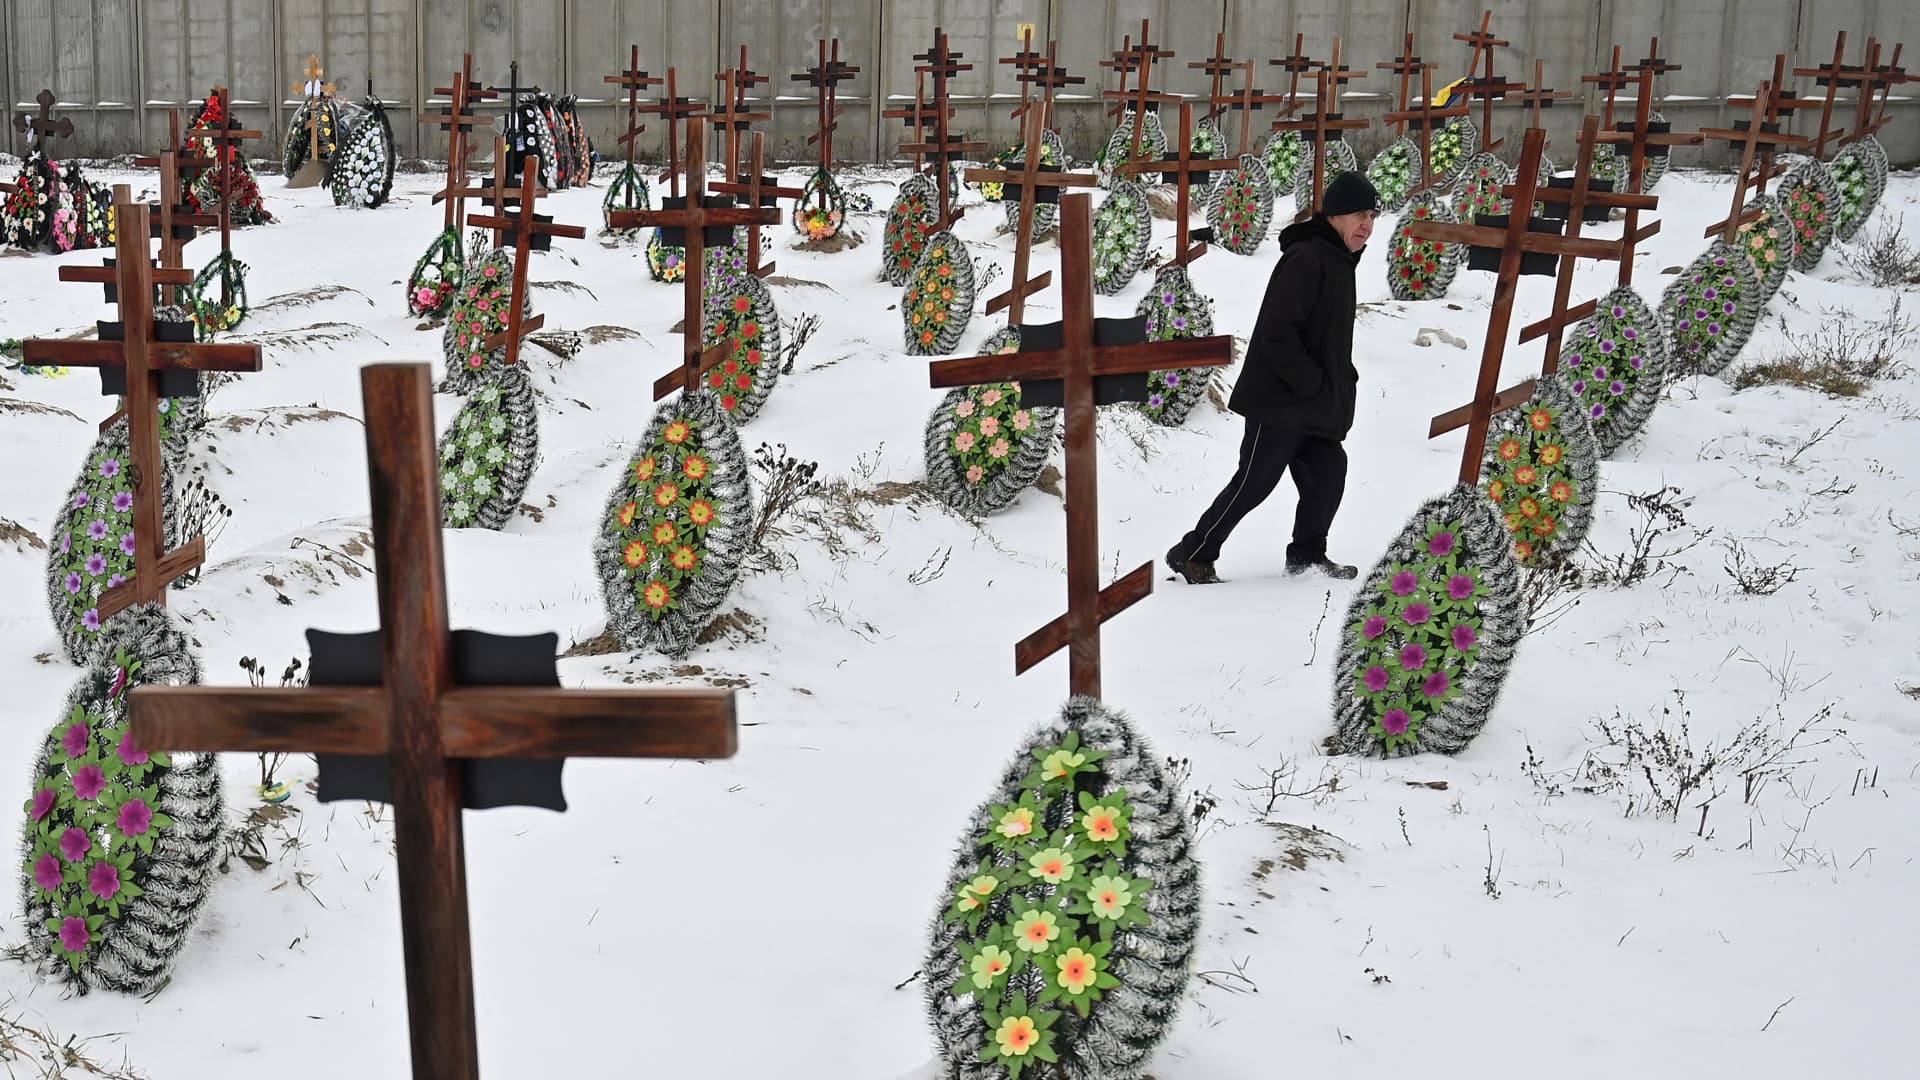 An elderly man walks among the graves of unidentified people, killed during Russian occupation, who were reburied from a mass grave in the small Ukrainian town of Bucha, near Kyiv, on January 12, 2023.